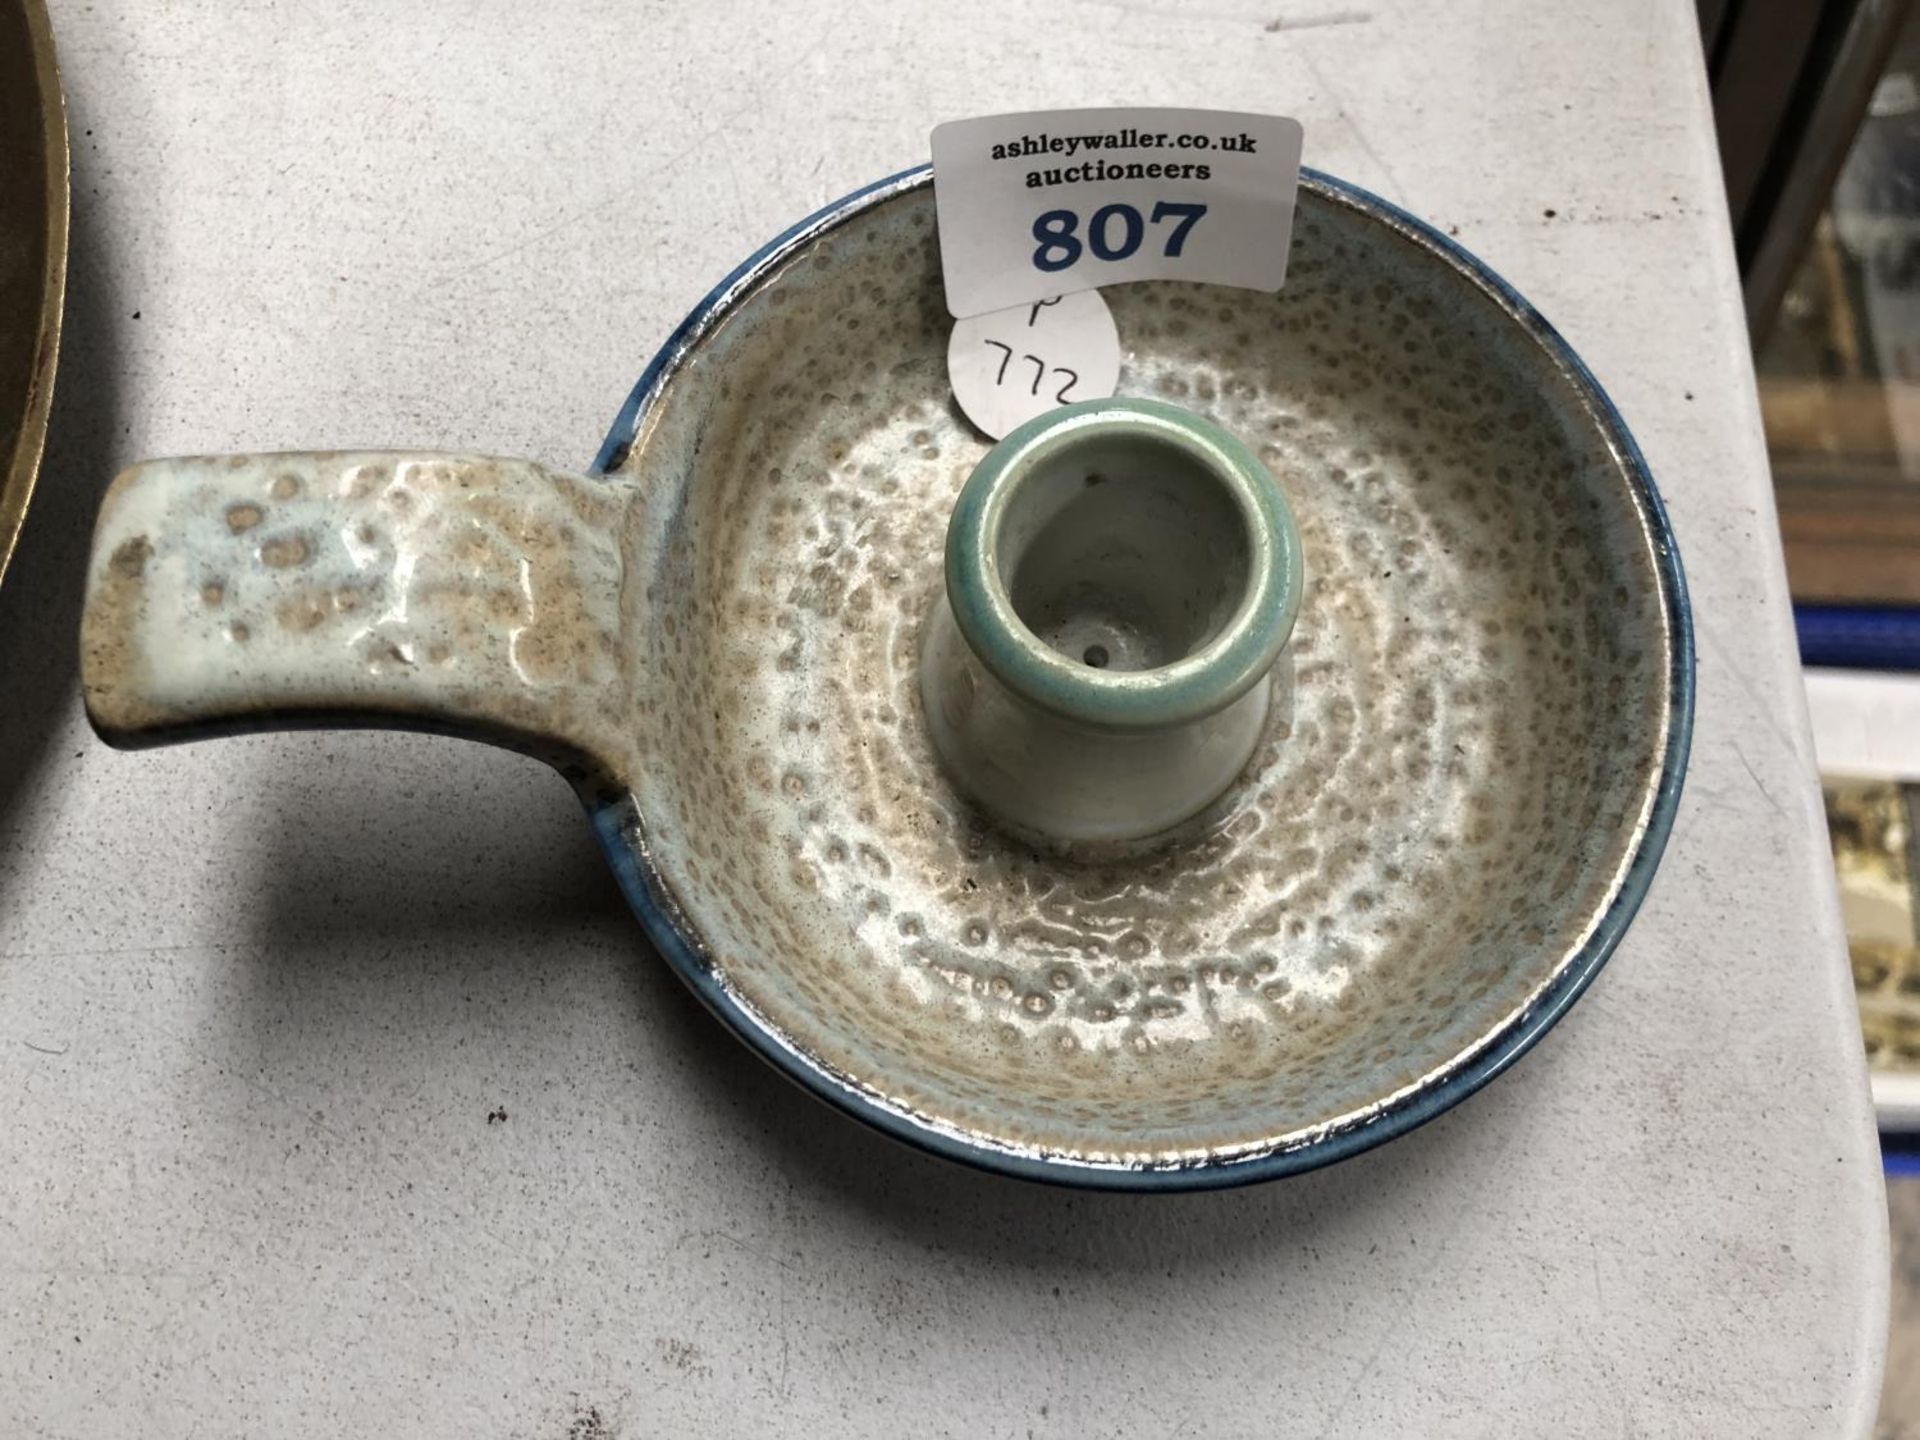 A ROYAL COPENHAGEN FAIENCE WARE CANDLE HOLDER